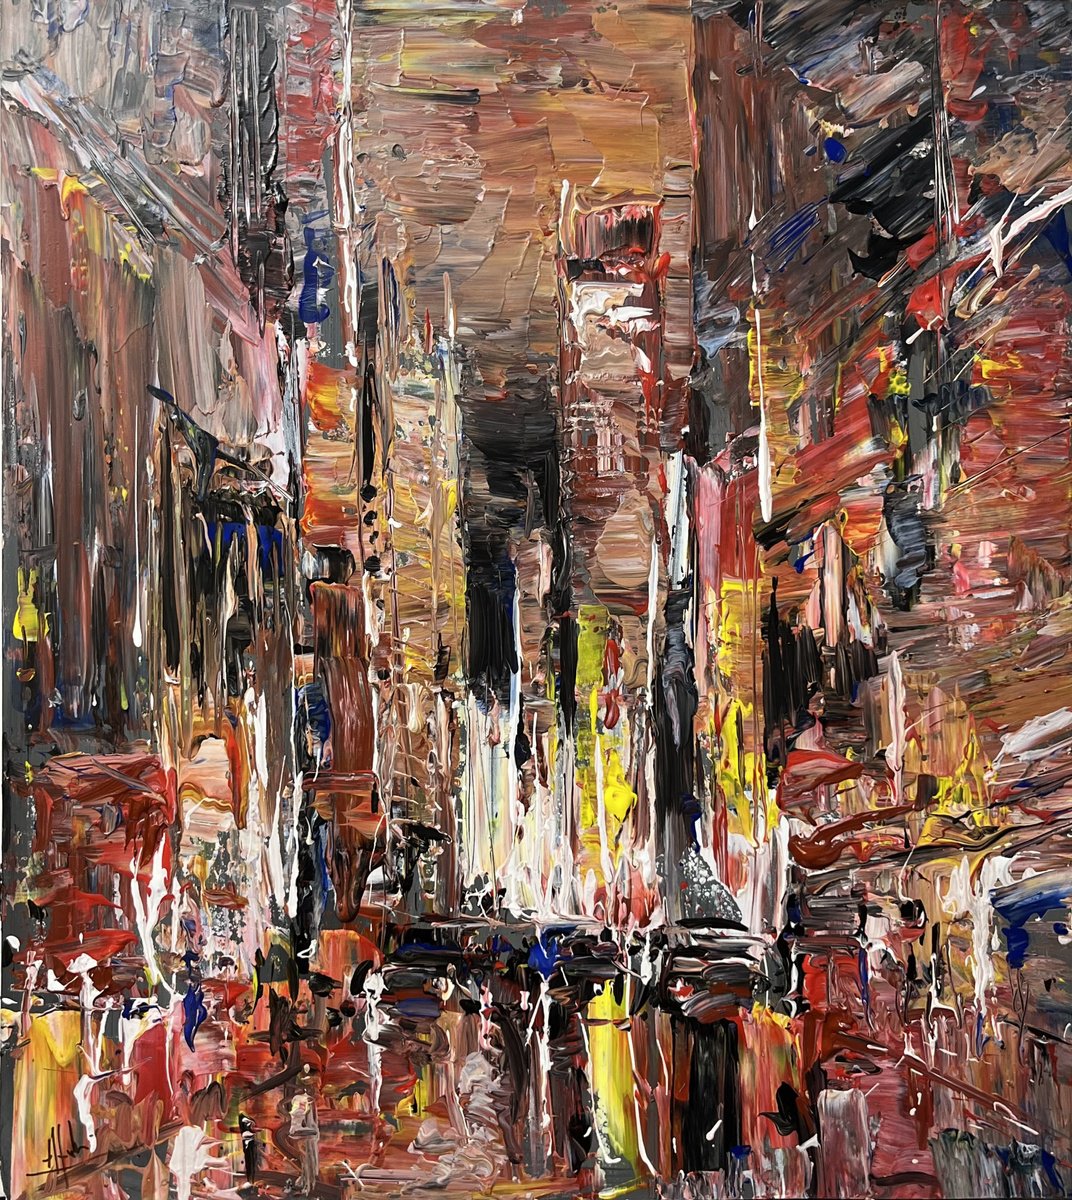 CITY LIGHTS 3, abstract impressionist painting 55x65cm by Altin Furxhi